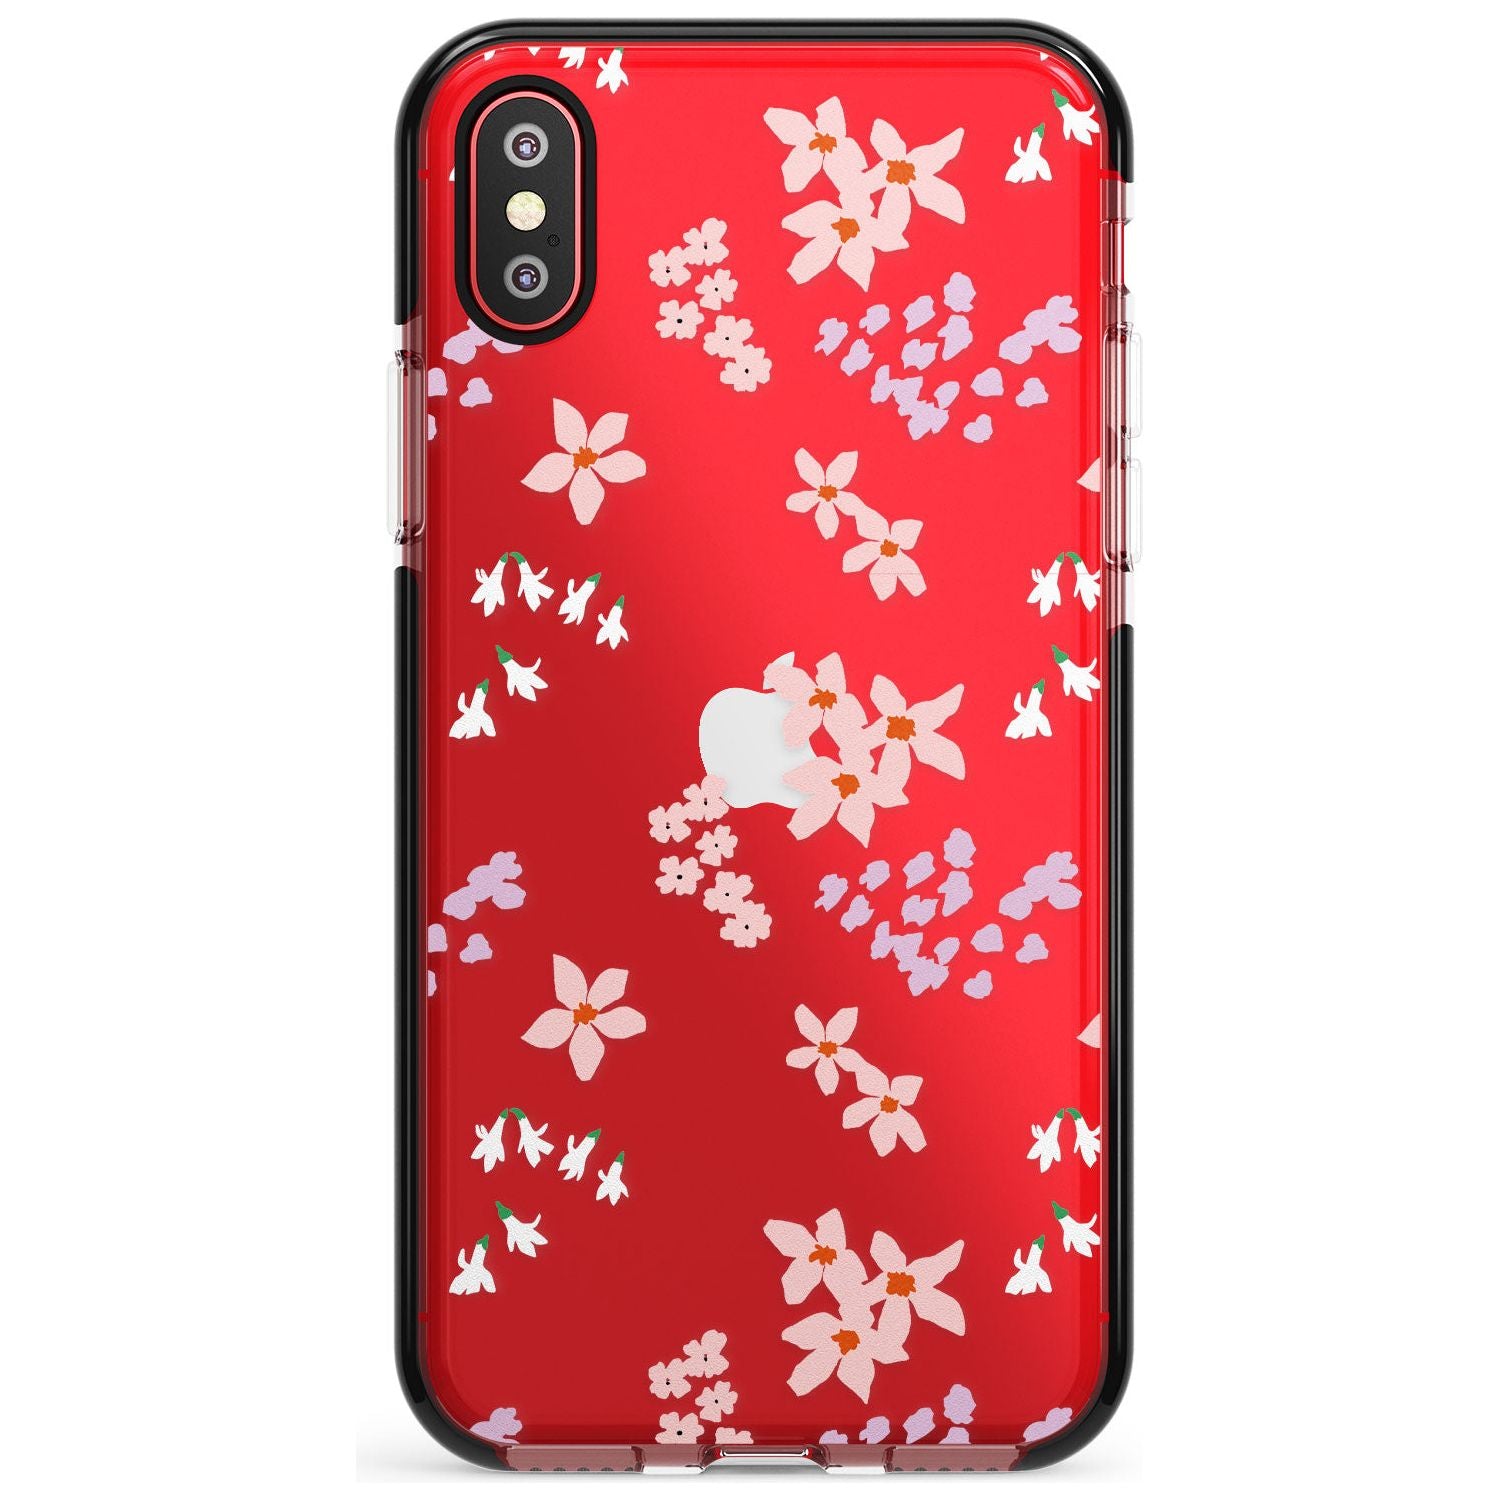 Pink & Purple Flower Mix: Clear Pink Fade Impact Phone Case for iPhone X XS Max XR